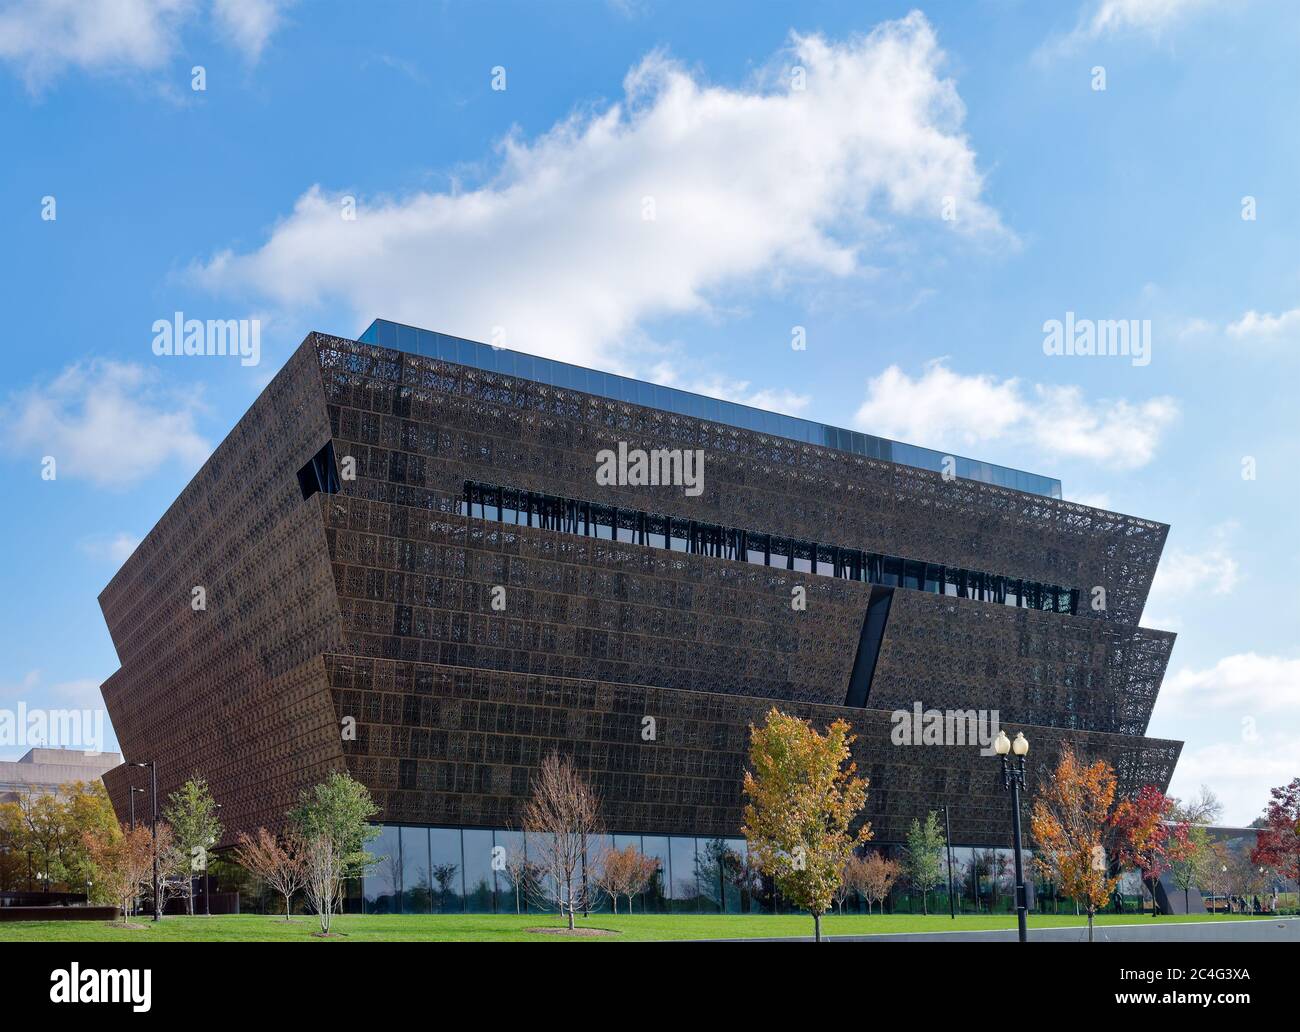 The National Museum of African American History and Culture, opened in 2016, is located on the National Mall, Washington, DC, USA Stock Photo